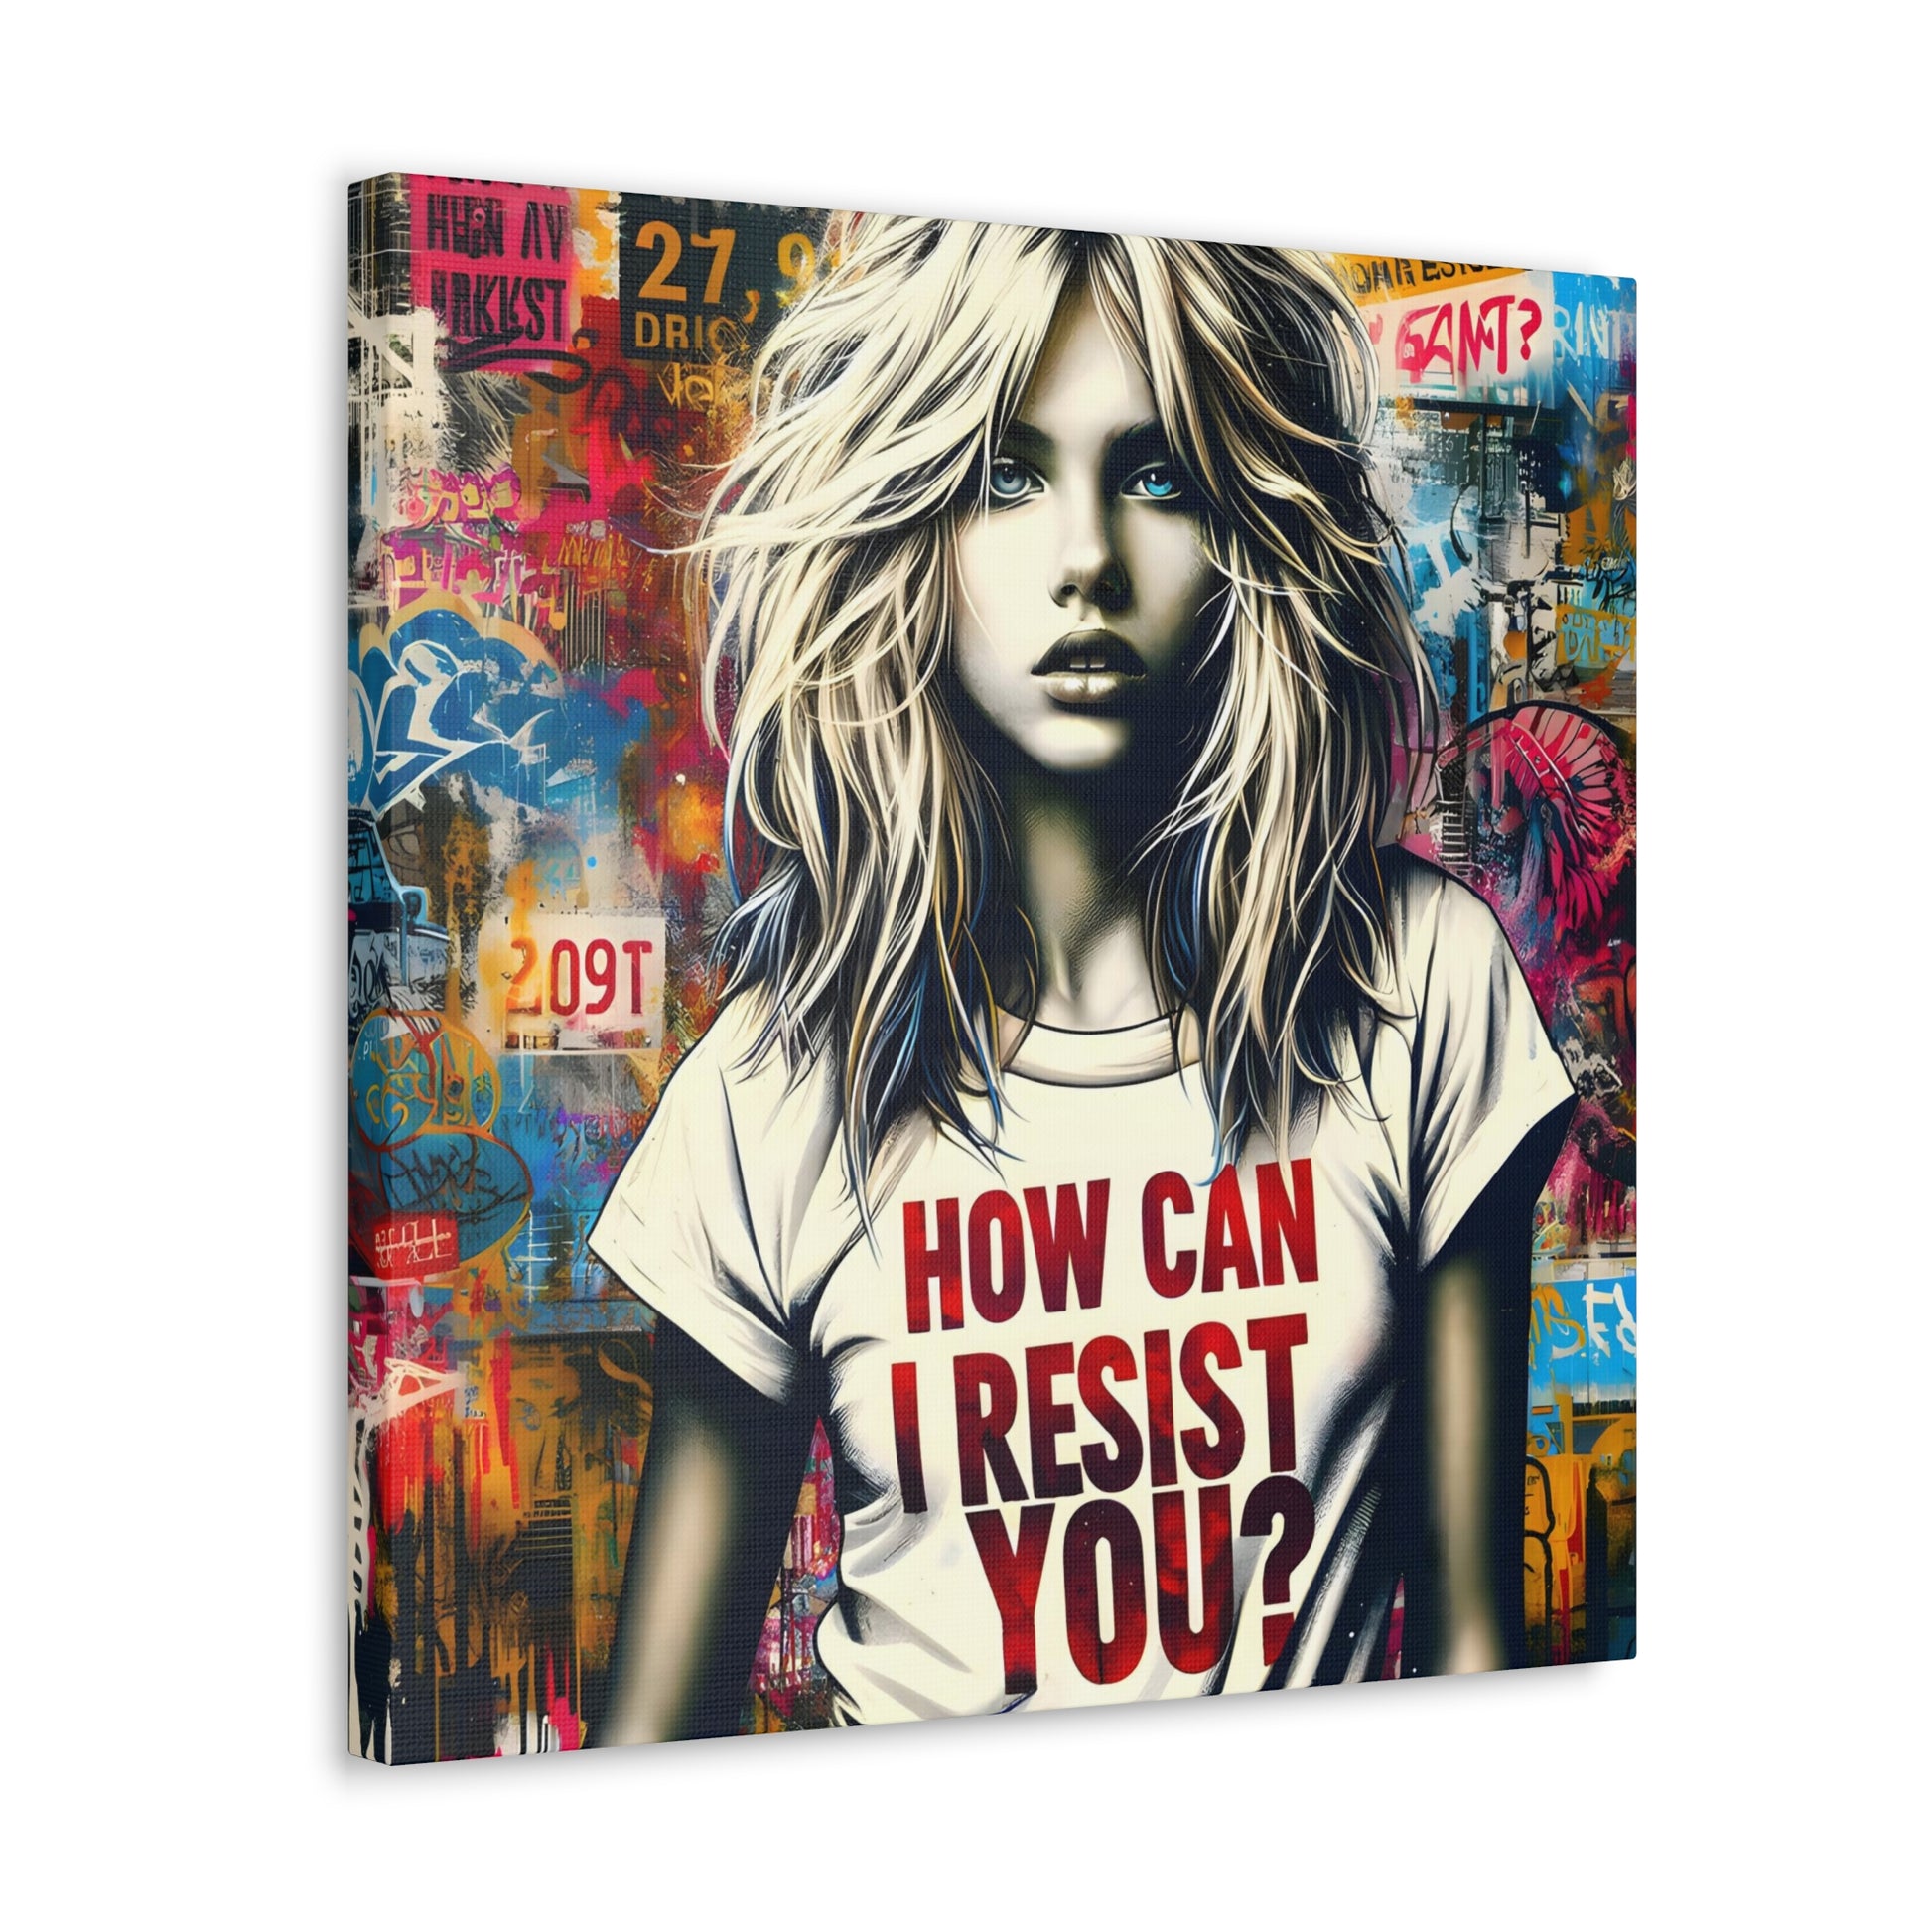 angled 2 AI-generated art, 'Resist You? – An ABBA Echo,' with a modern Aphrodite in urban setting, her shirt reading 'HOW CAN I RESIST YOU?' amidst colorful graffiti, echoing ABBA's themes.